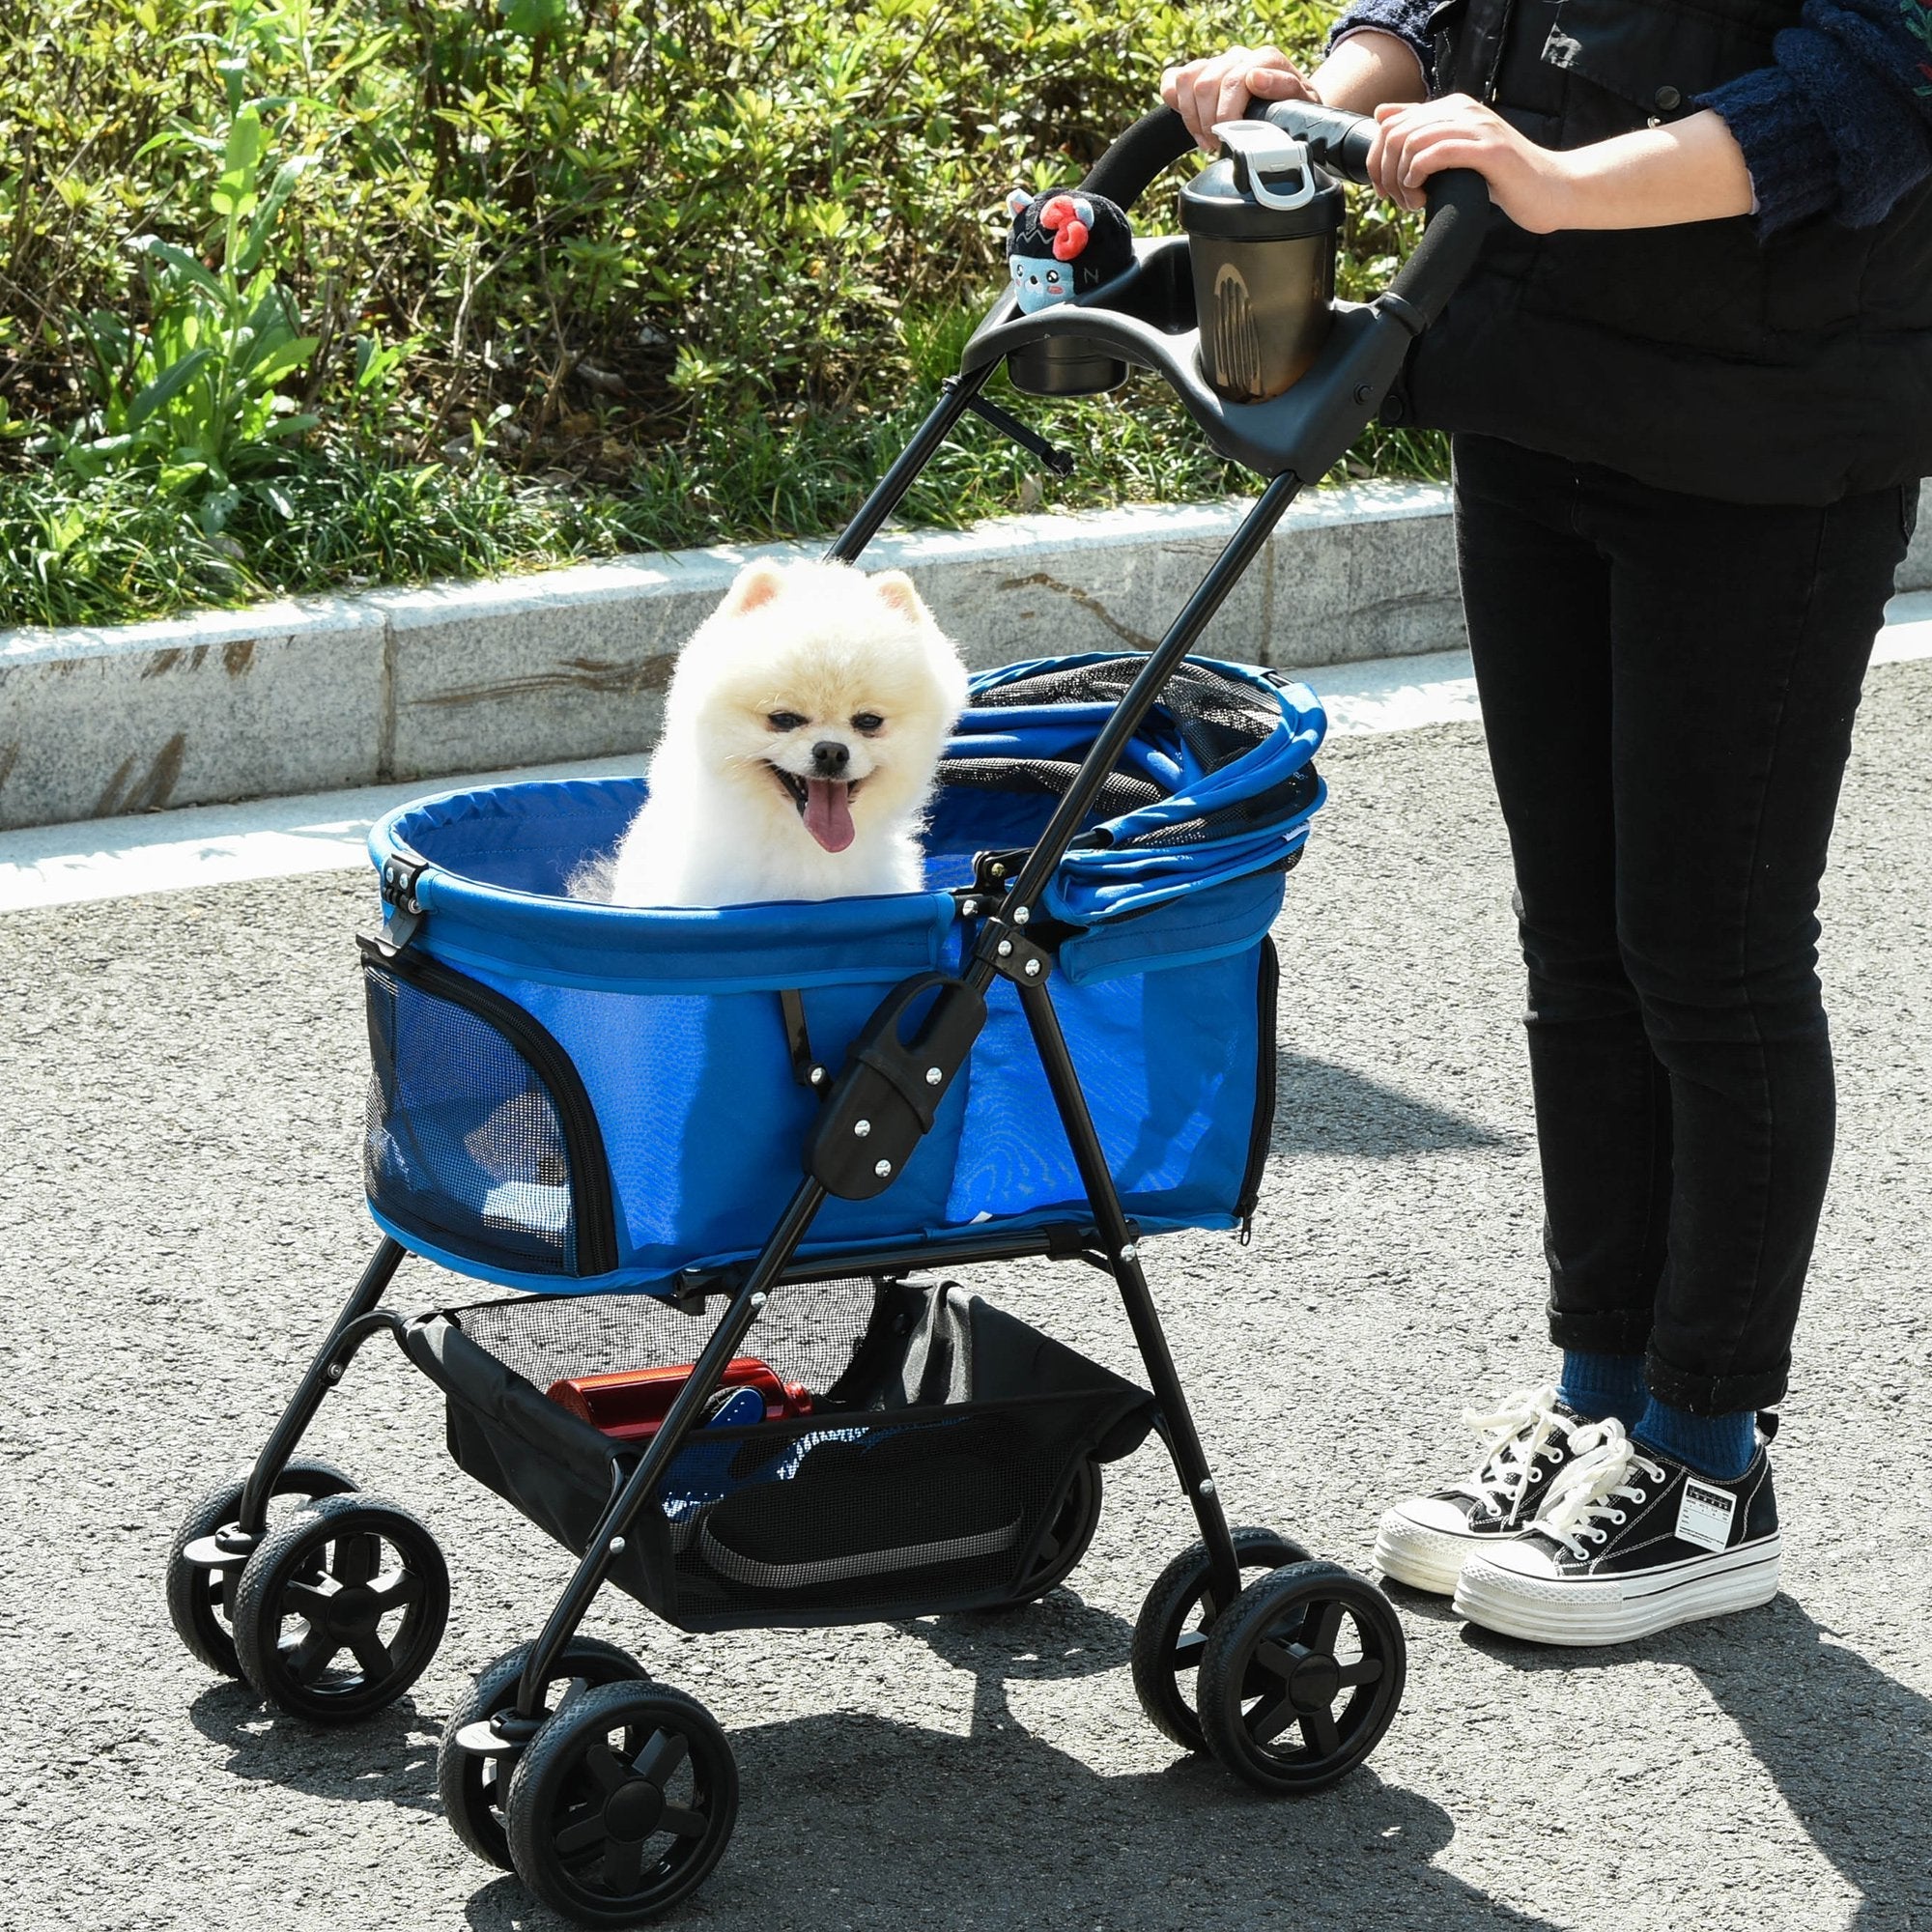 Pet Stroller Pushchair No-Zip Foldable Travel Carriage with Brake Basket Adjustable Canopy Blue - Inspirely